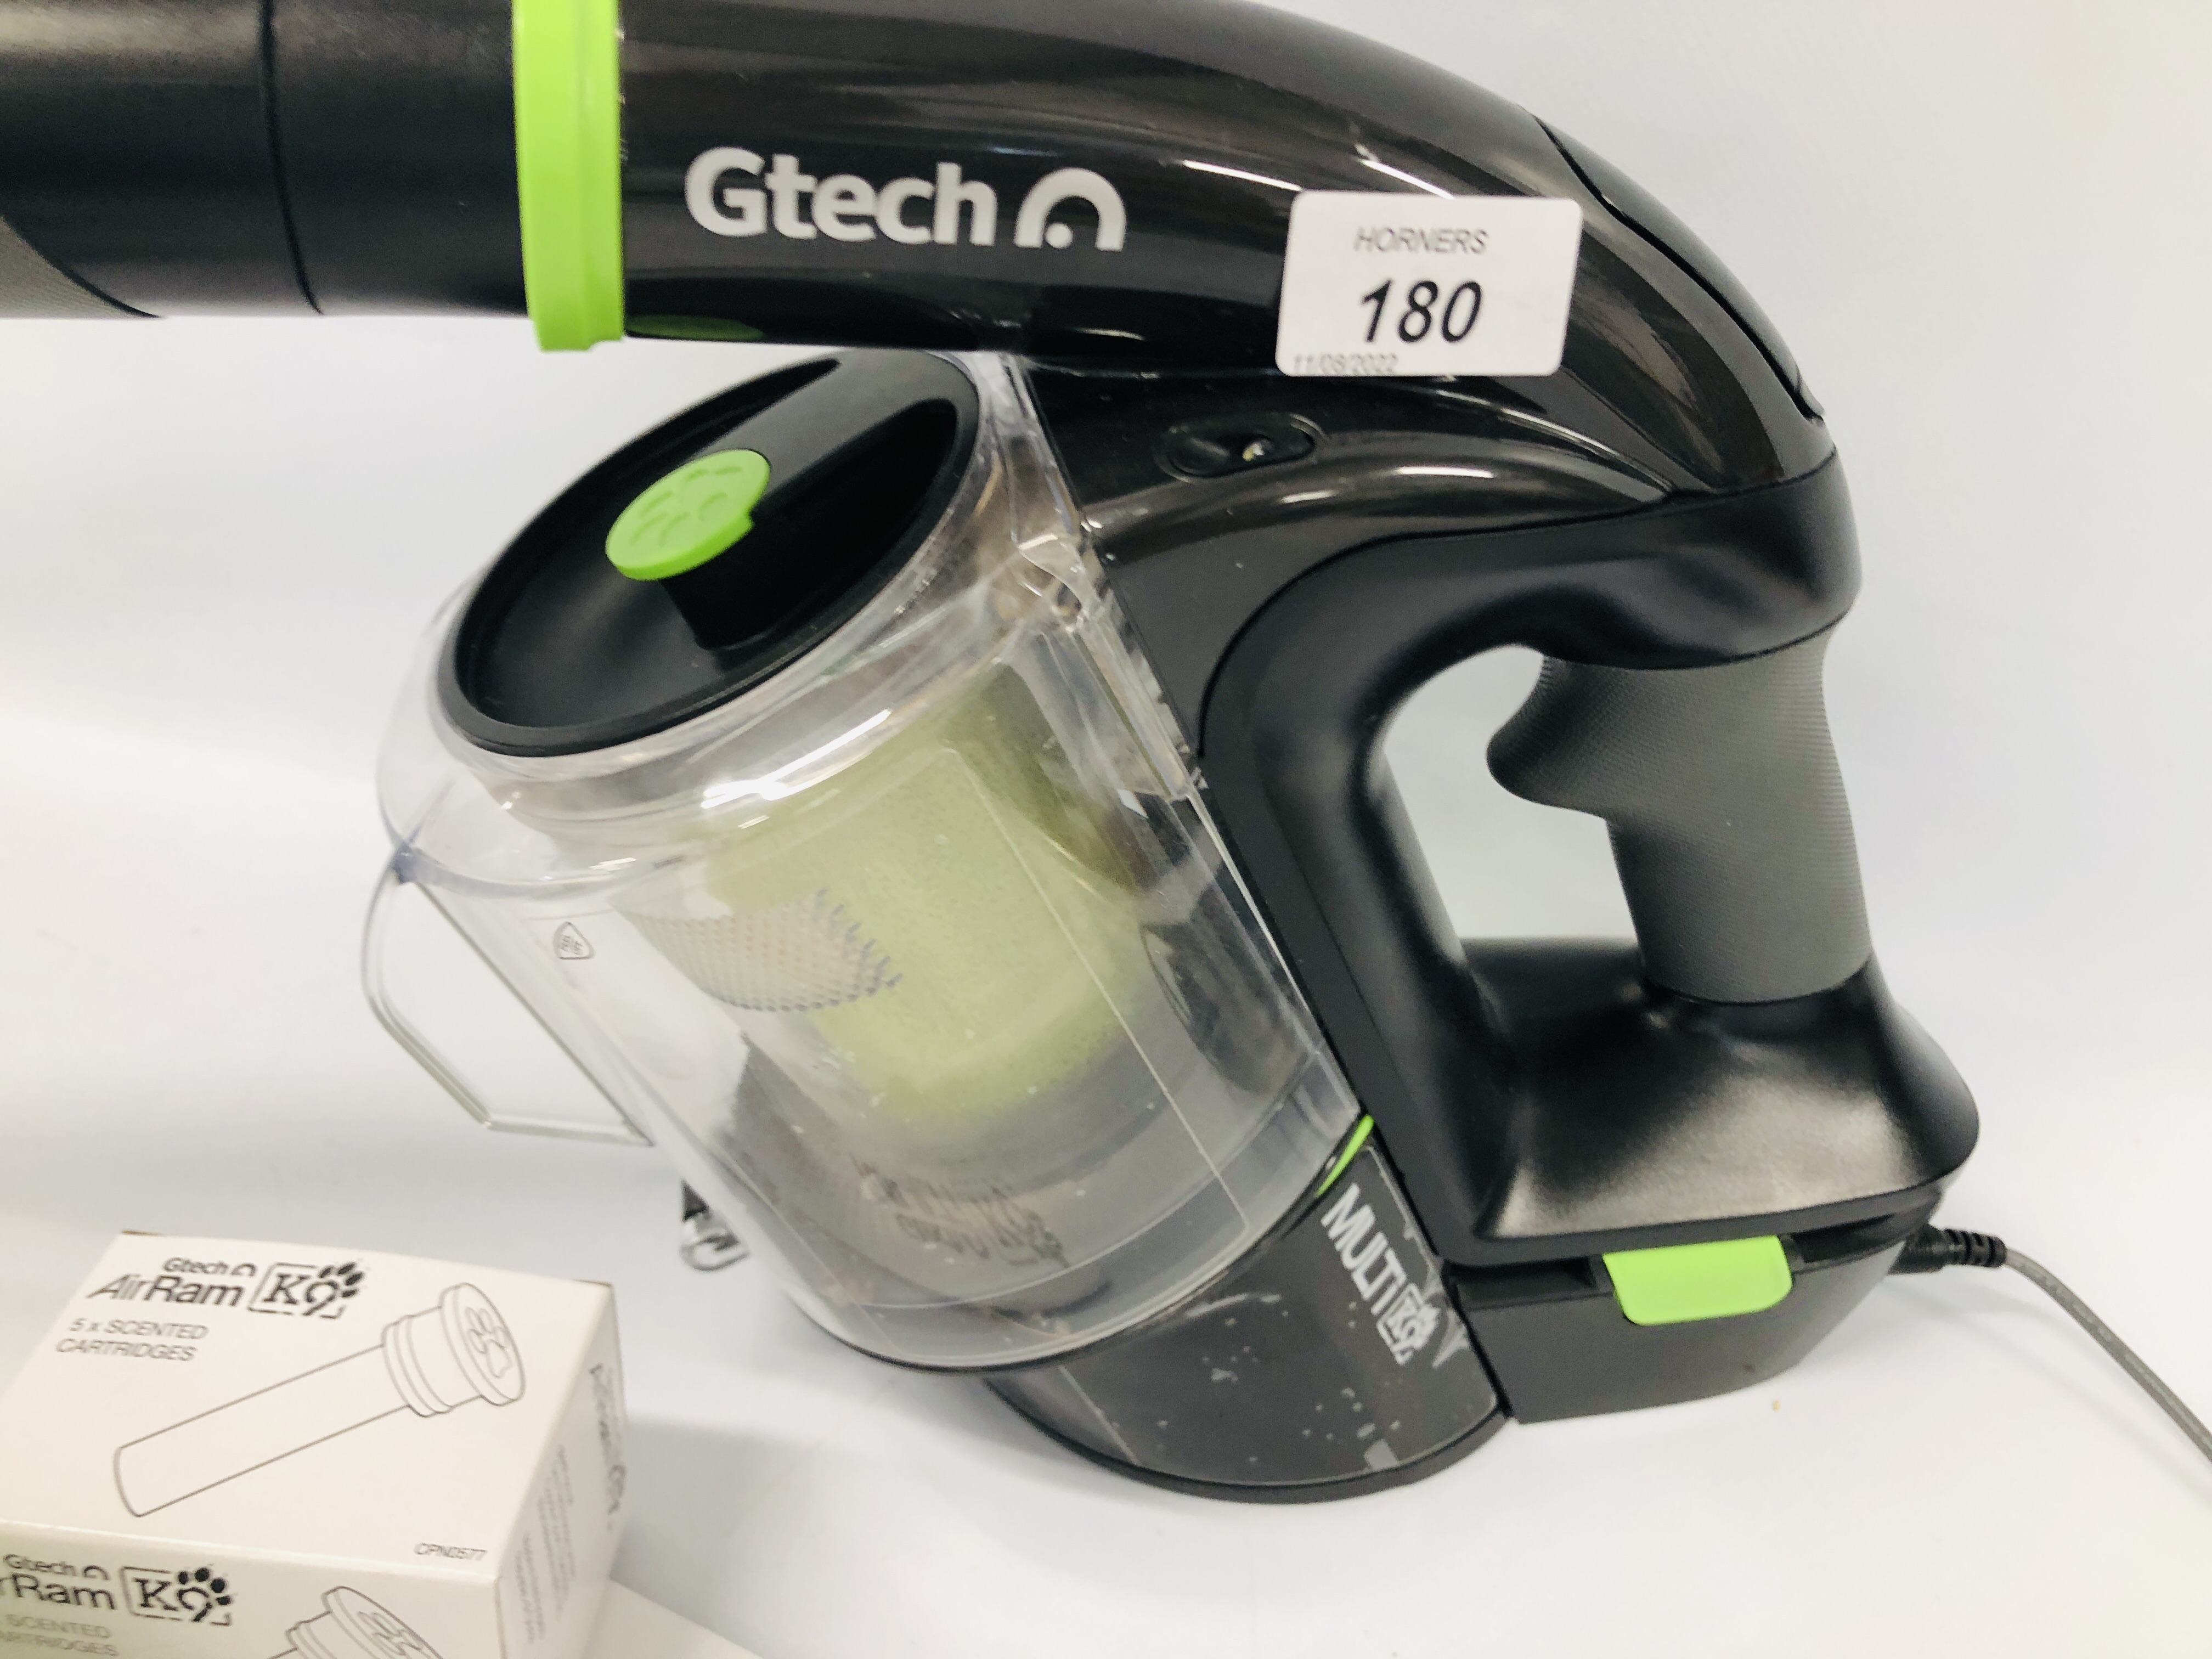 A GTECH MULTI K9 CORDLESS HAND HELD VACUUM WITH ACCESSORIES AND HANDBOOK - SOLD AS SEEN. - Image 4 of 4